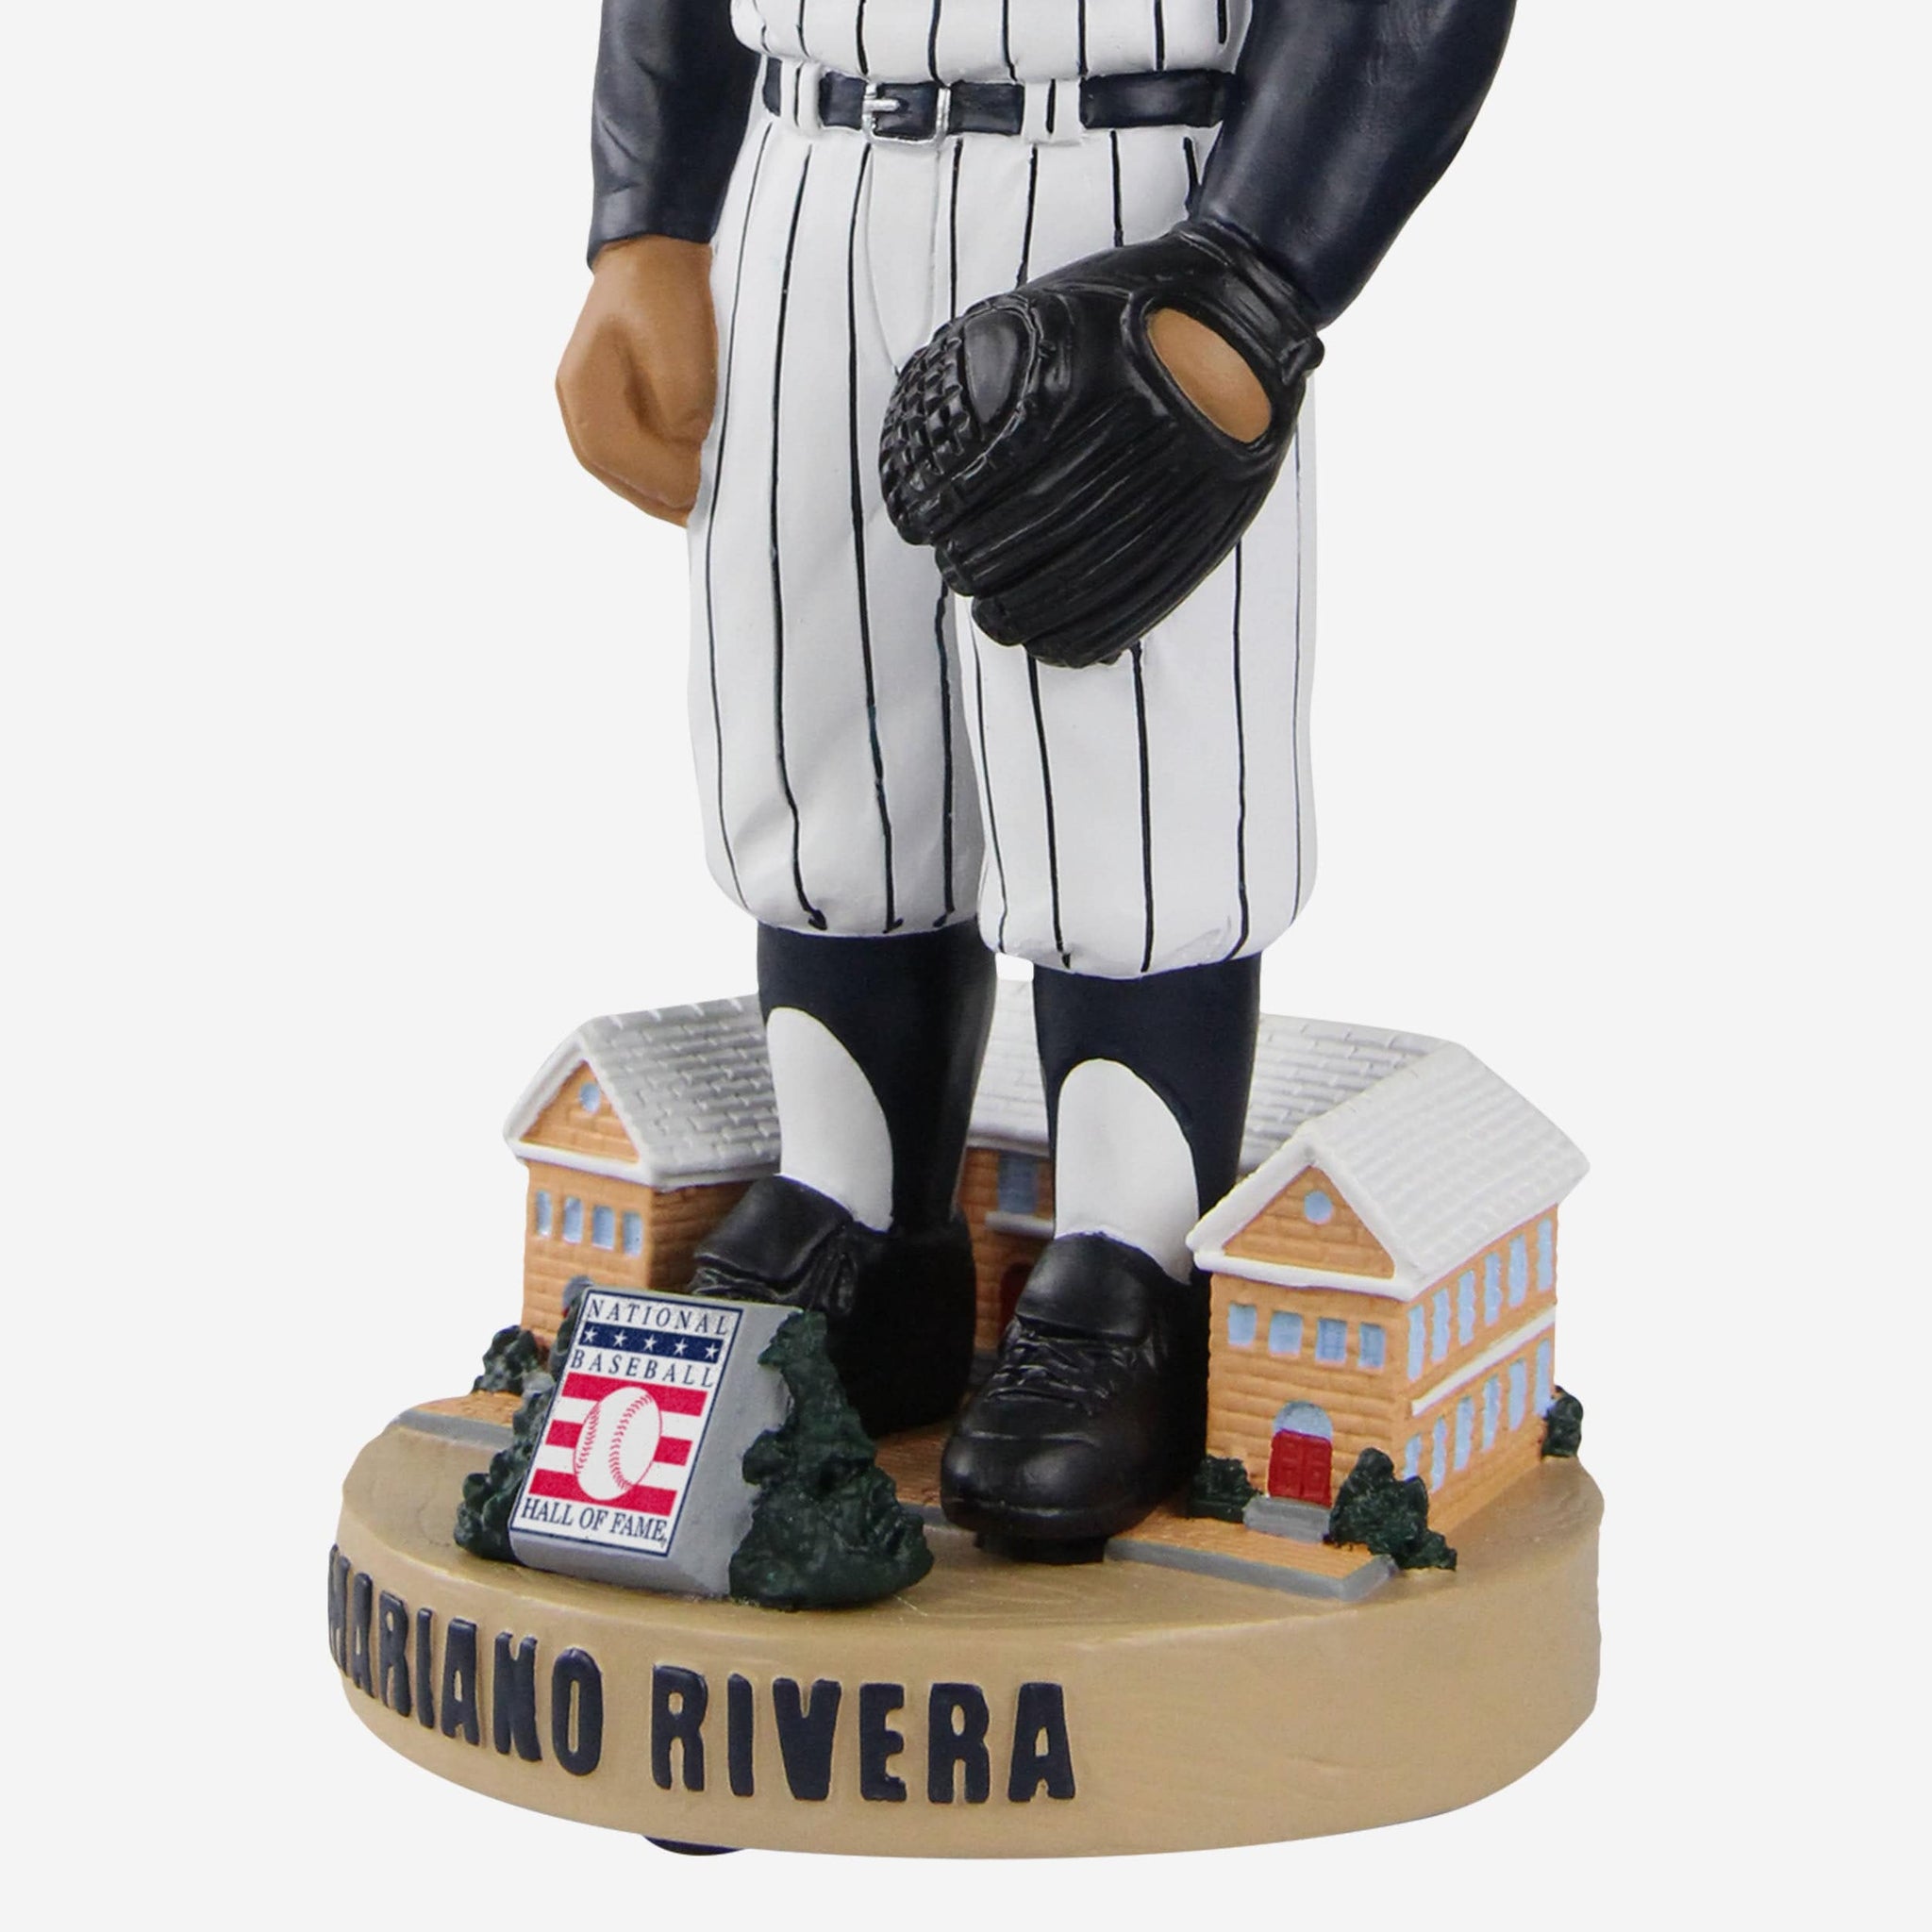 This Mariano Rivera 13X All-Star Bobblehead just dropped